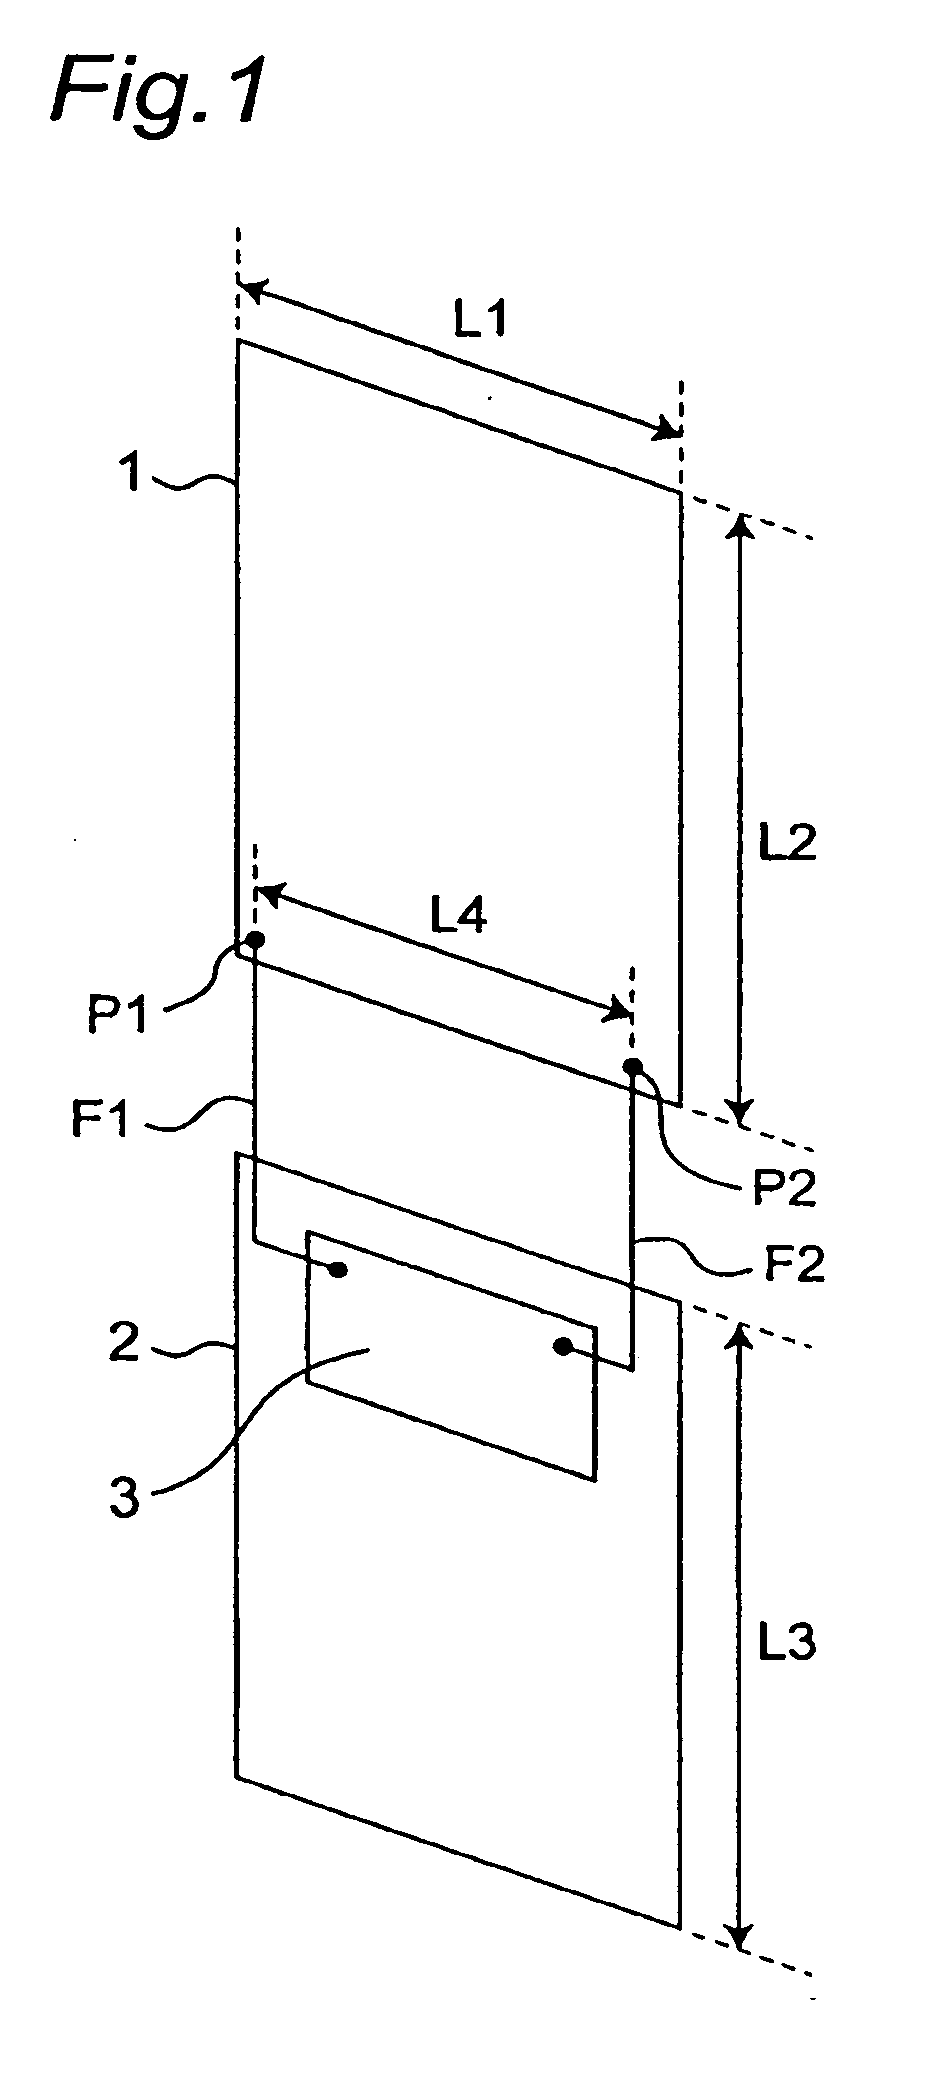 Antenna apparatus provided with antenna element excited through multiple feeding points